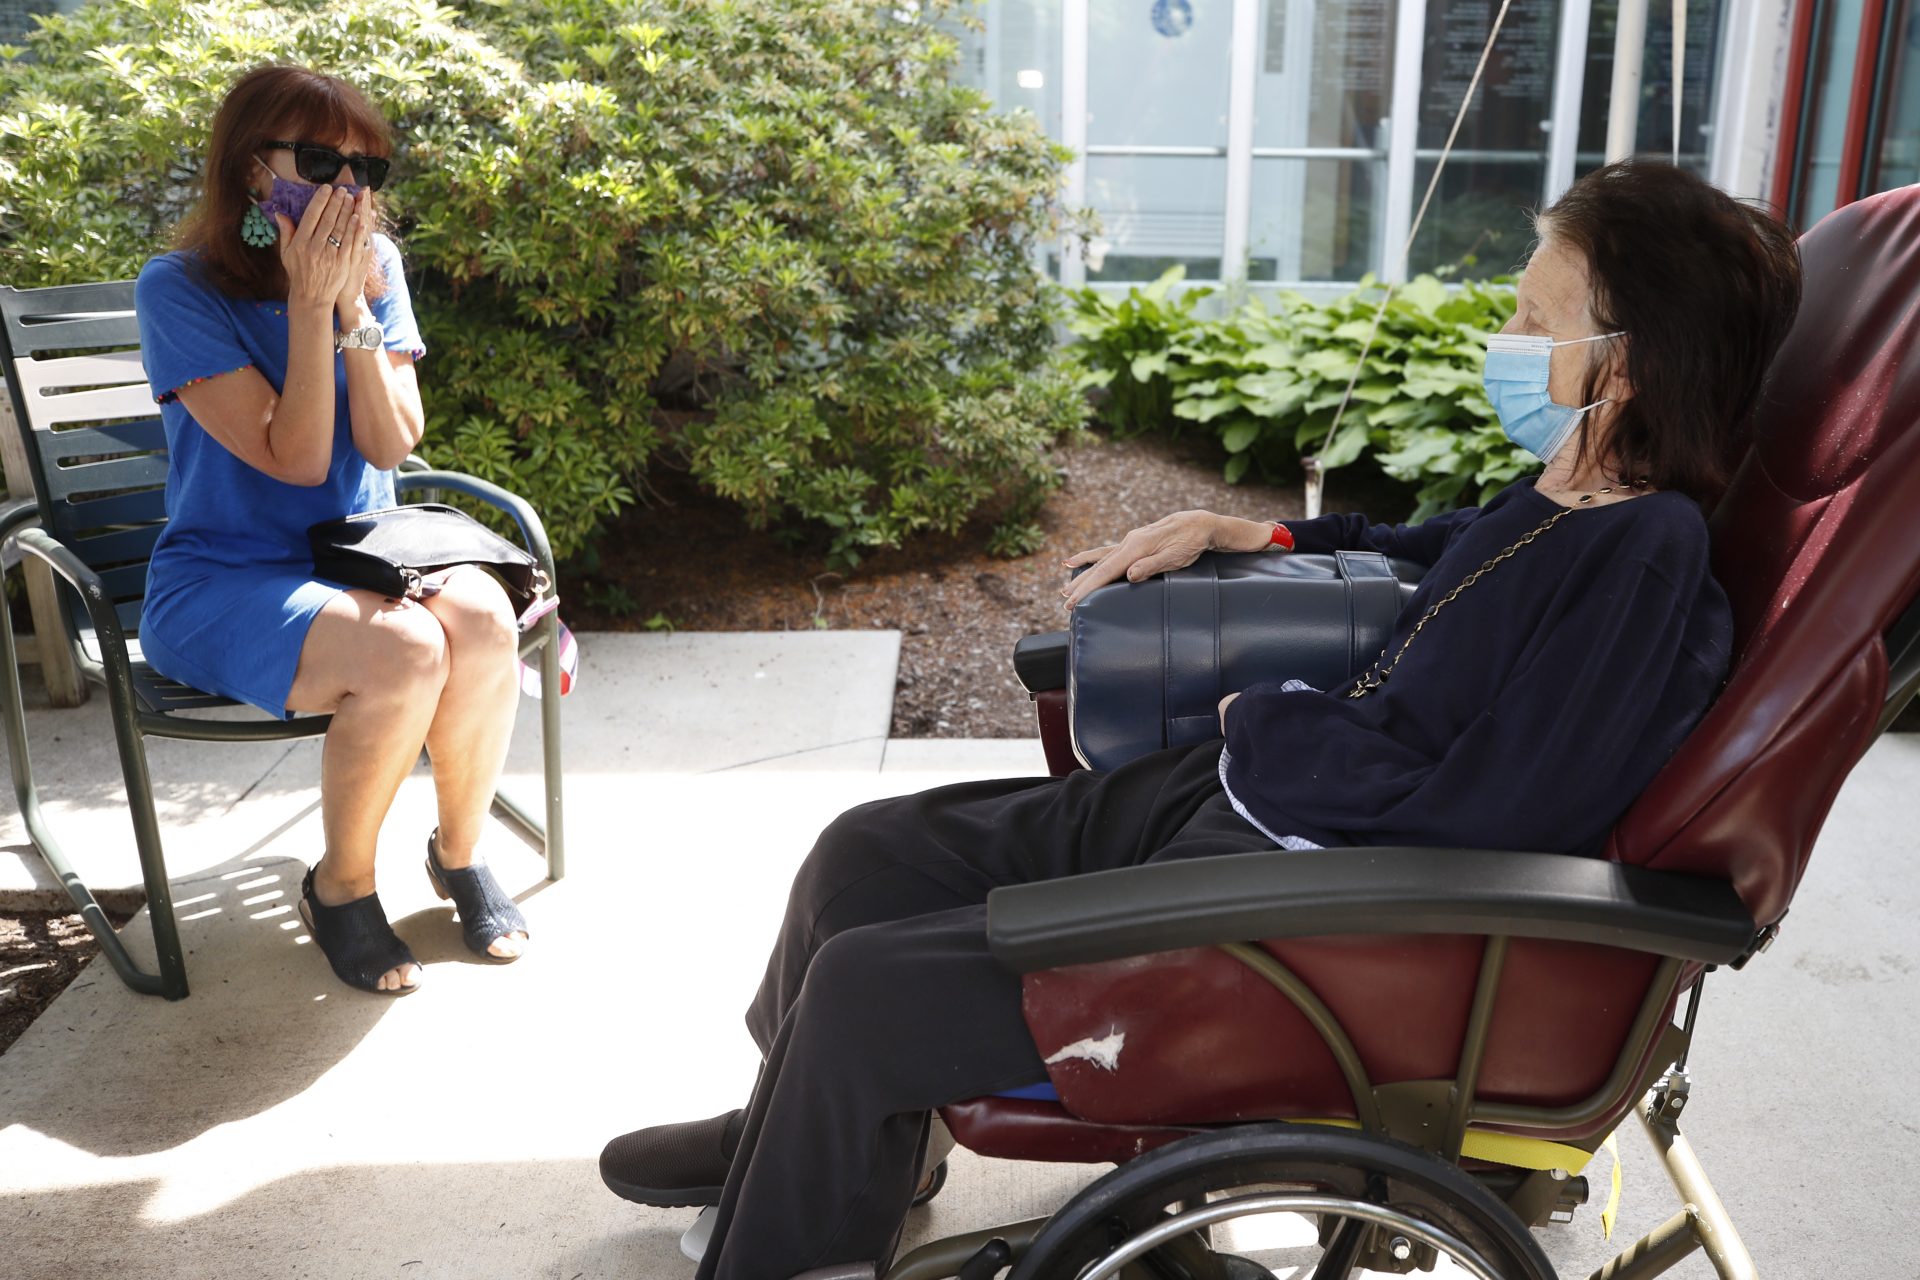 Marcie Abramson, left, becomes emotional as she speaks to her mother, Cynthia, outdoors at the Hebrew Rehabilitation Center, Wednesday June 10, 2020, in Boston, under the state's new nursing home visitation guidelines which requires social distancing. The two haven't been able to visit in person since March.